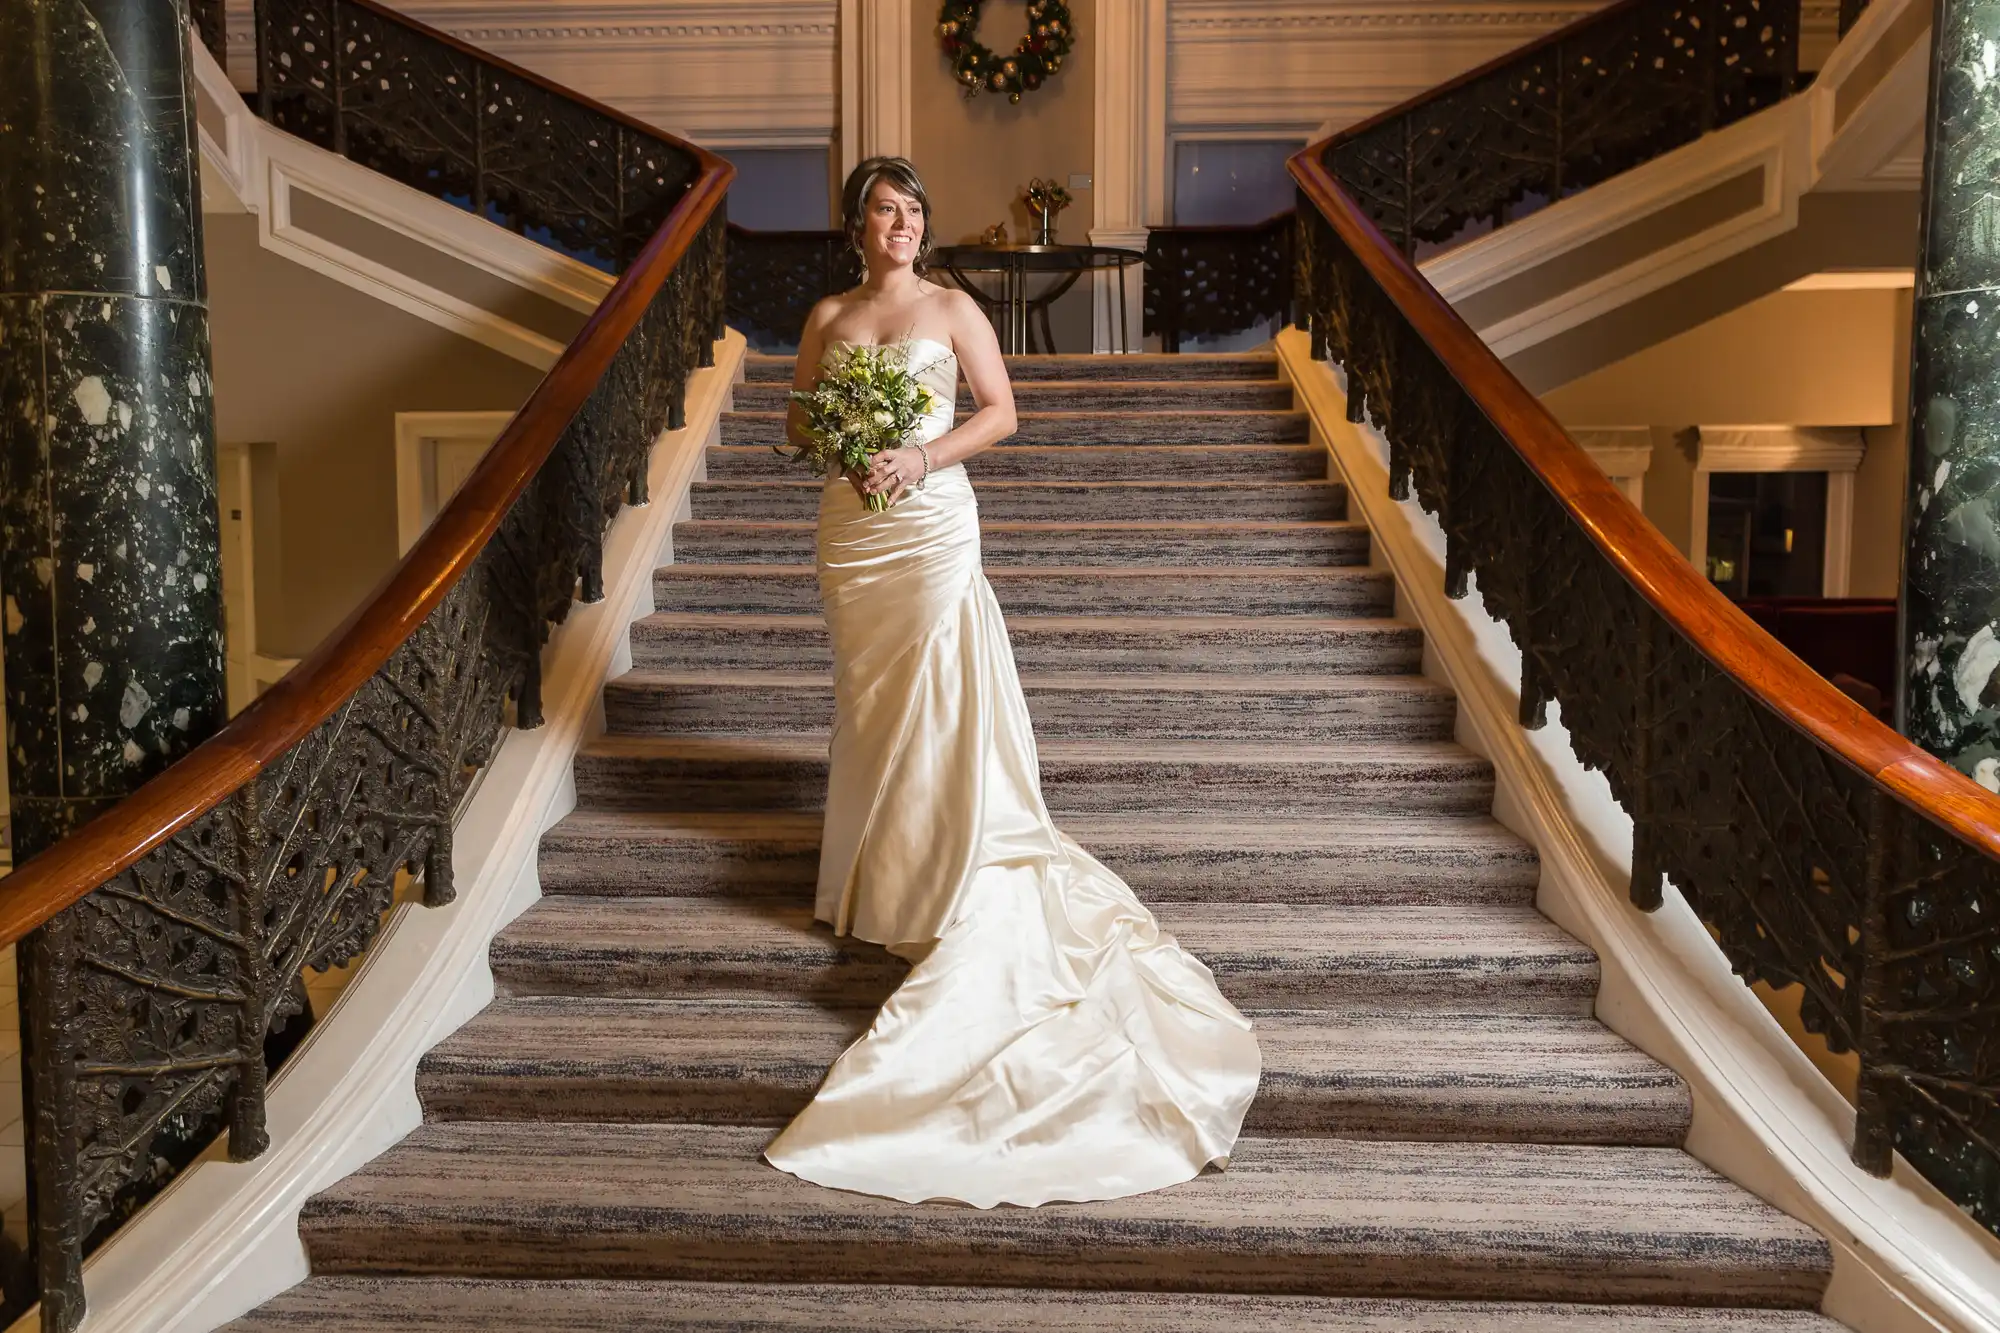 A bride in a strapless white gown holding a bouquet stands on an elegant staircase with dark bannisters and a carpeted runner, in a grand, opulent interior.